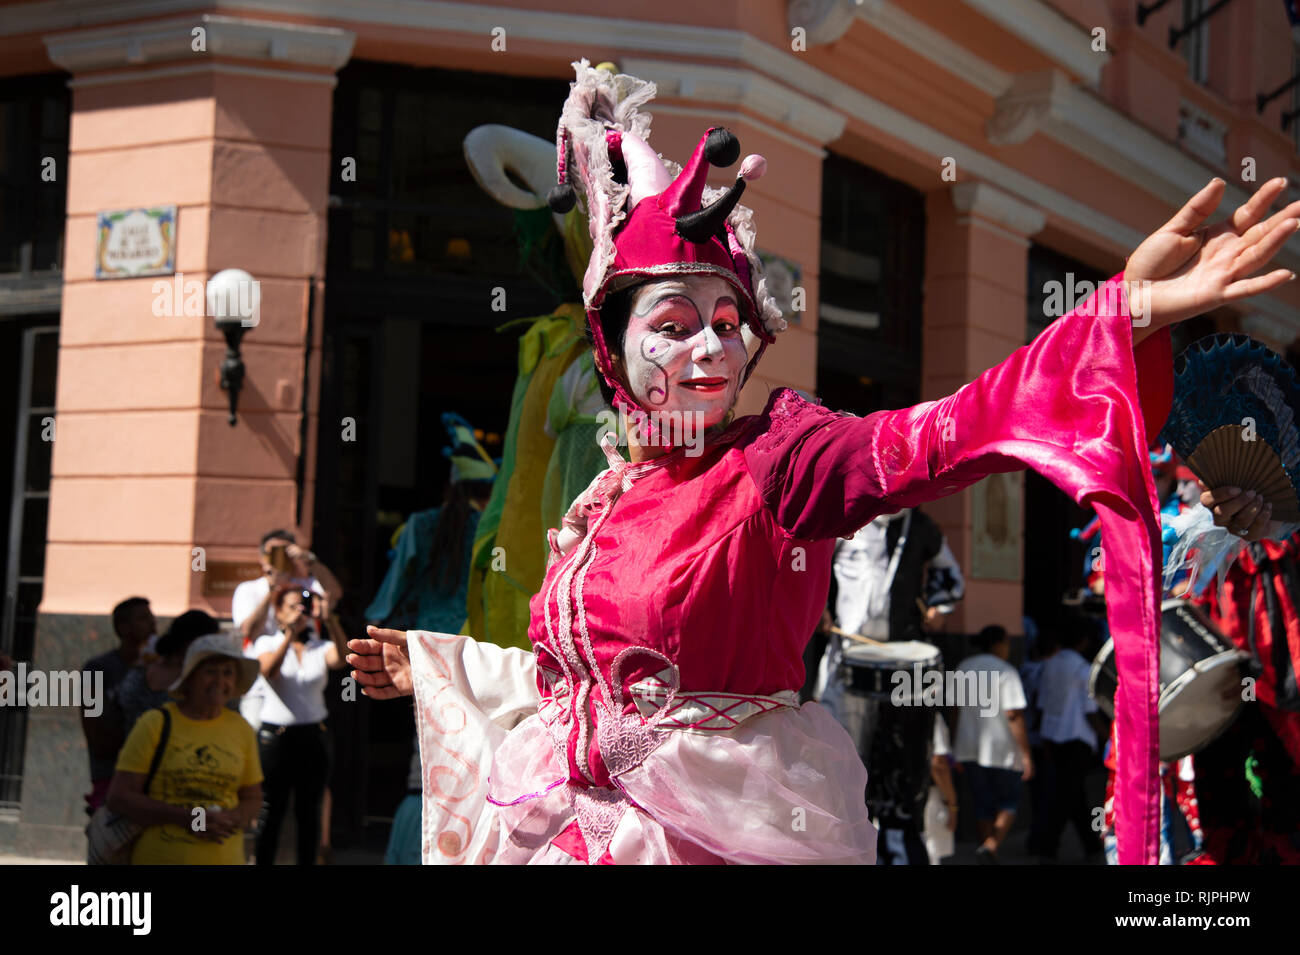 A female street entertainer dressed in costume performs for the crowds in Havana Cuba Stock Photo